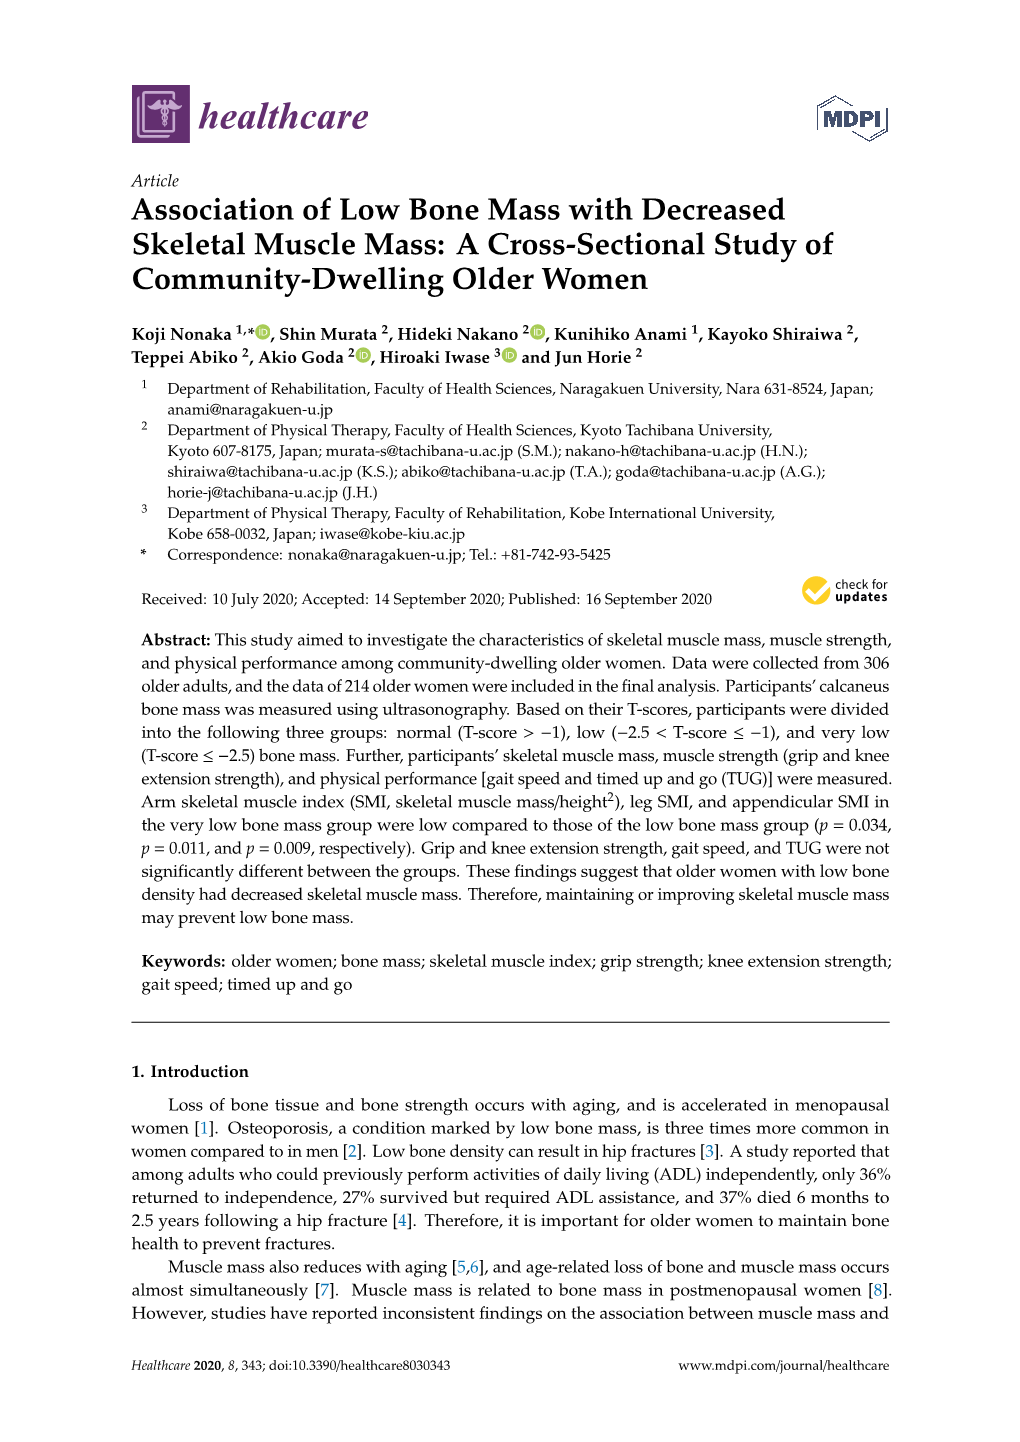 Association of Low Bone Mass with Decreased Skeletal Muscle Mass: a Cross-Sectional Study of Community-Dwelling Older Women